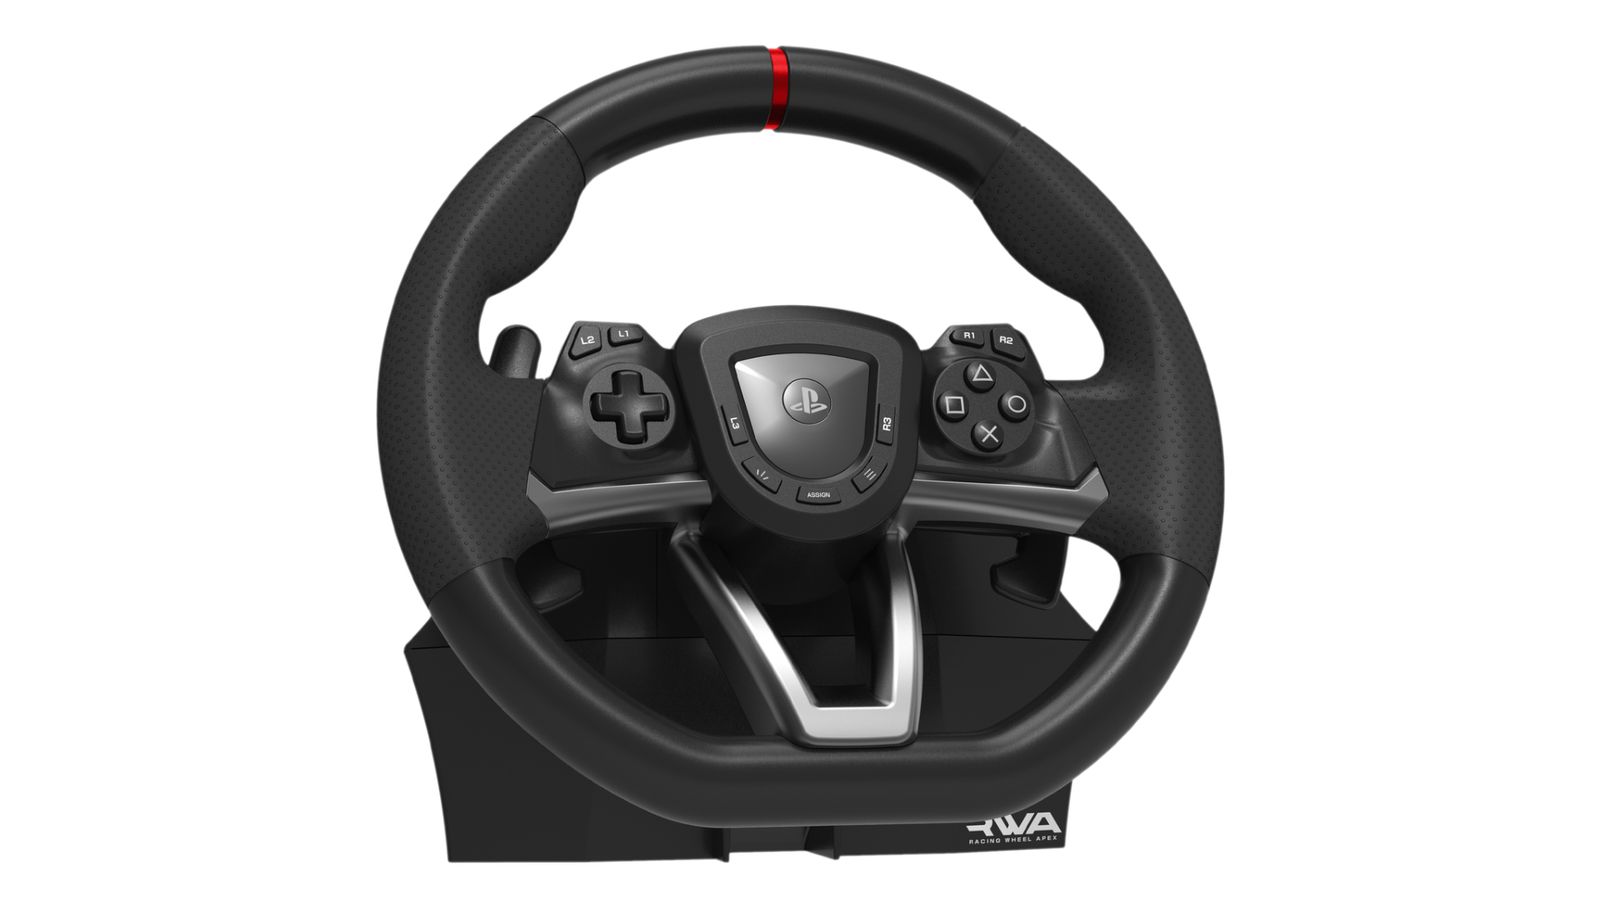 Hori RWA Apex product image of a black racing wheel with a red centre line at the top.